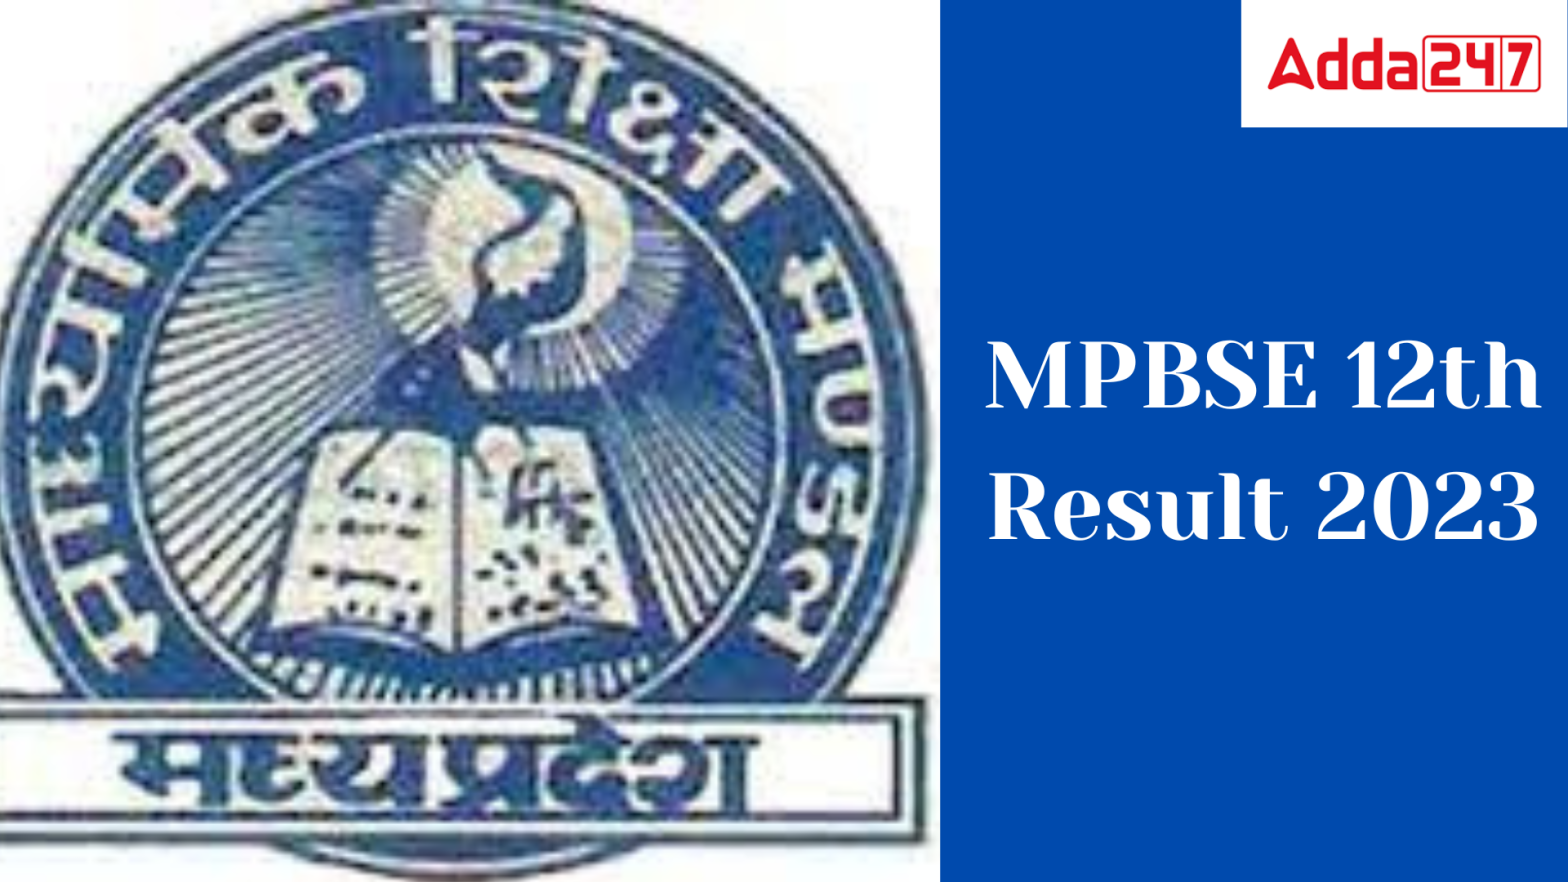 MPBSE 12th Result 2023